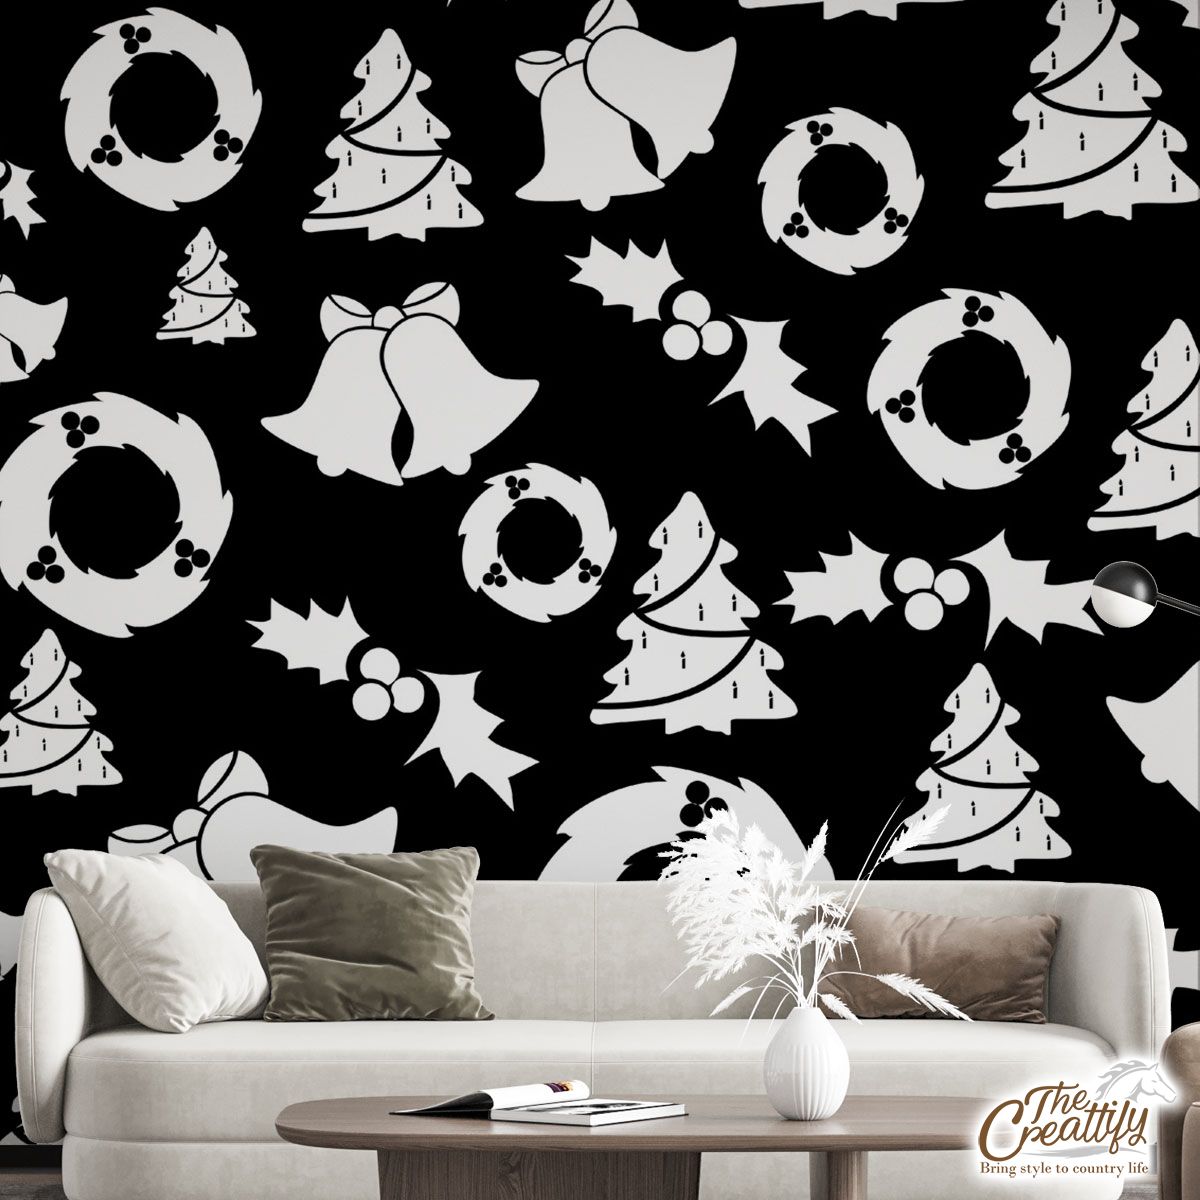 Christmas Wreath, Holly Leaf, Pine Tree And Bells On Black Wall Mural